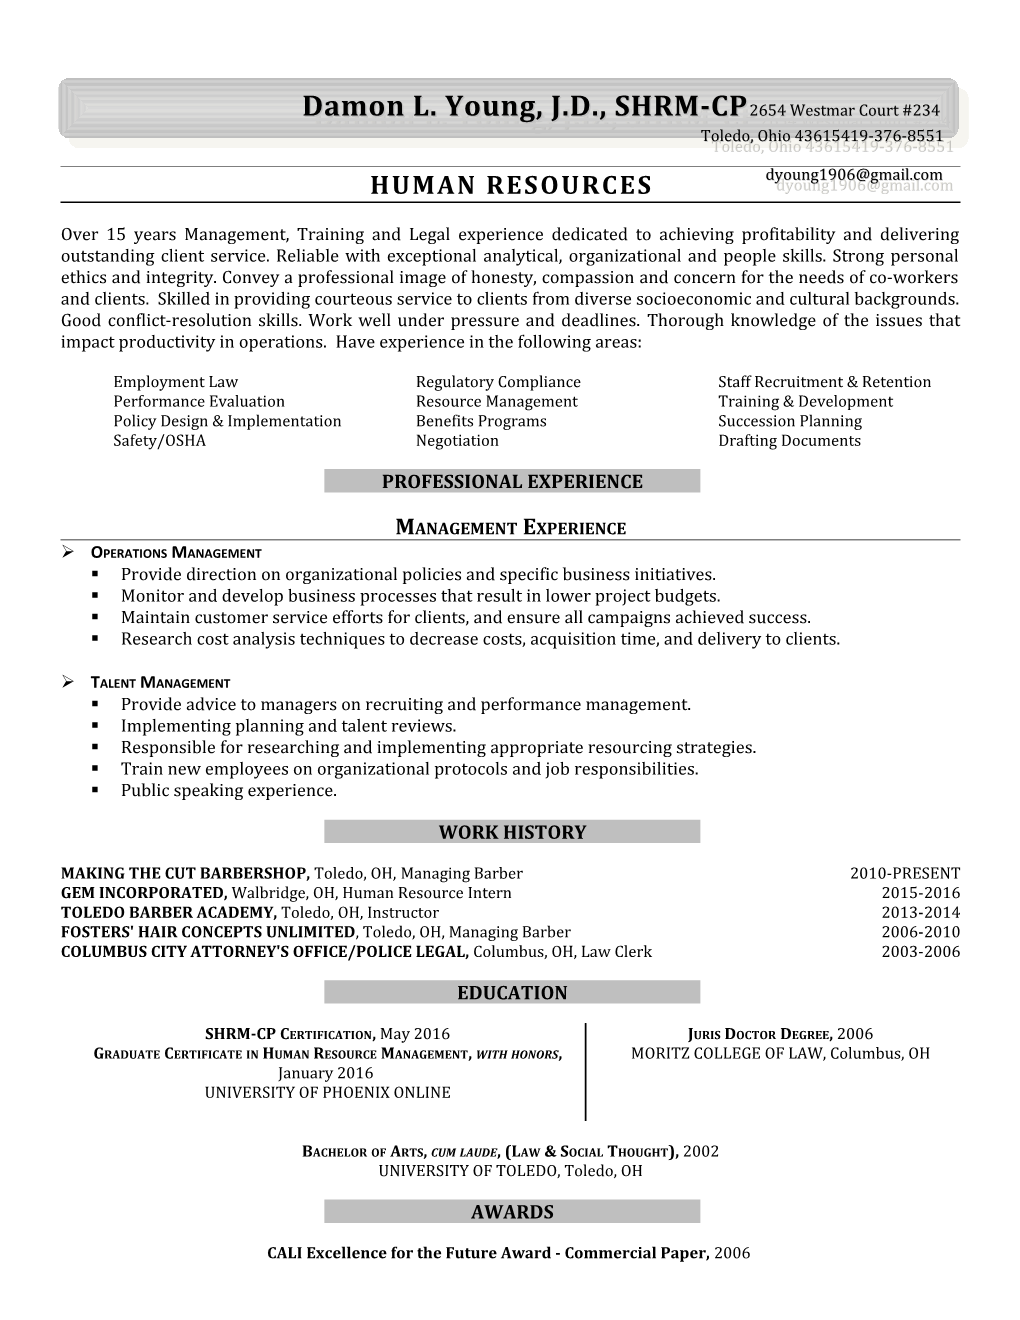 Name of Client Resume, Page 2